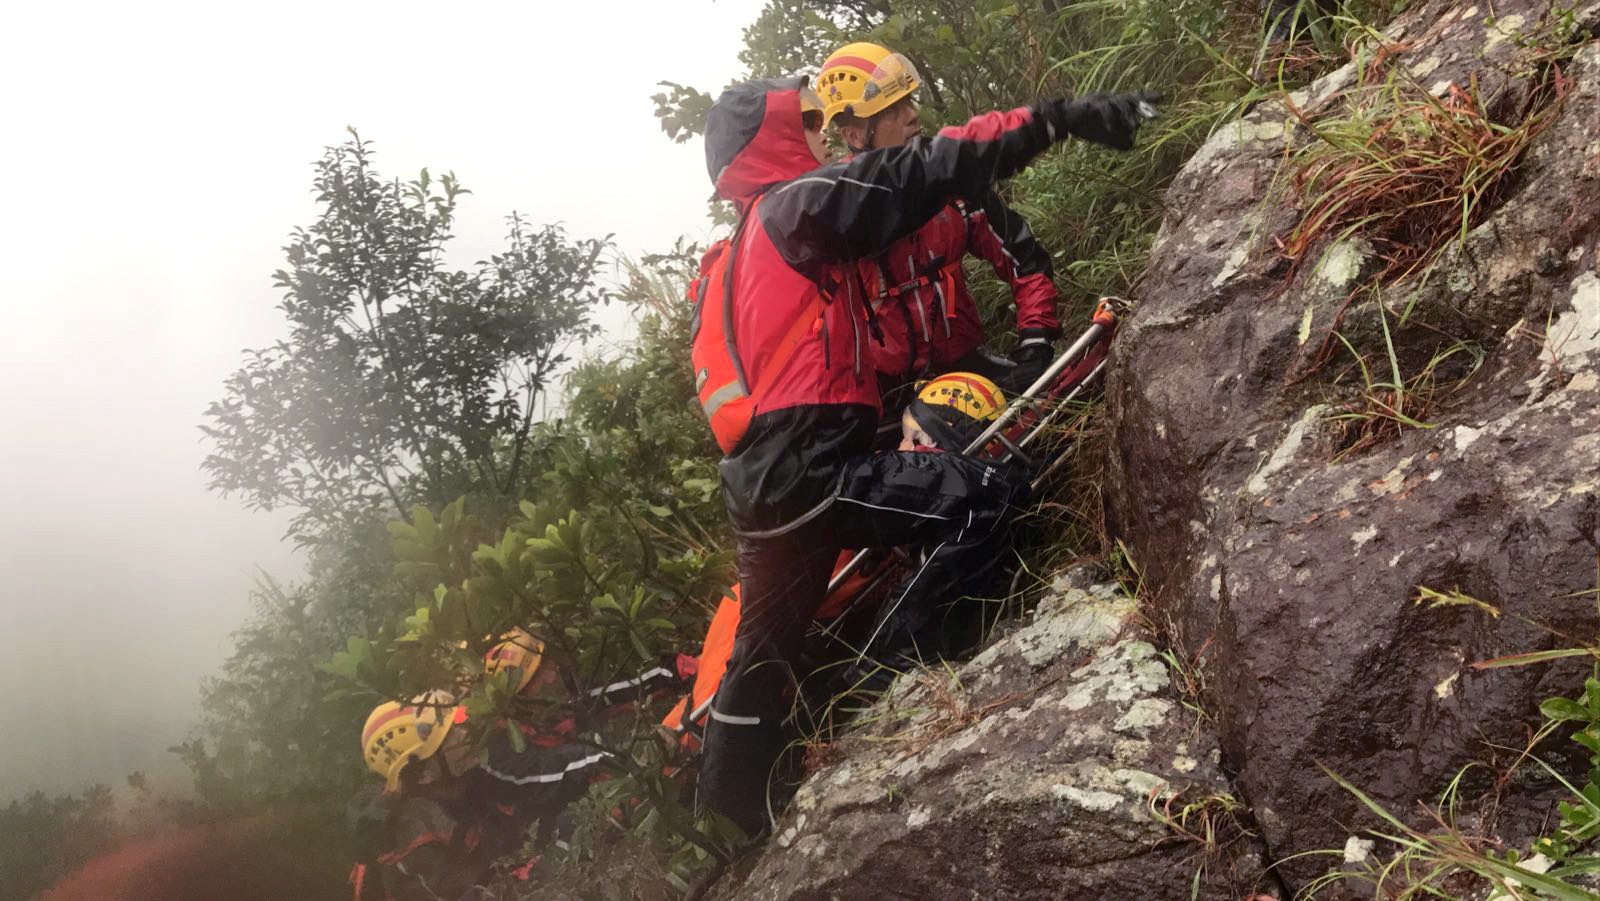 Some 160 fire service personnel were deployed to find the hikers. Photo: Handout